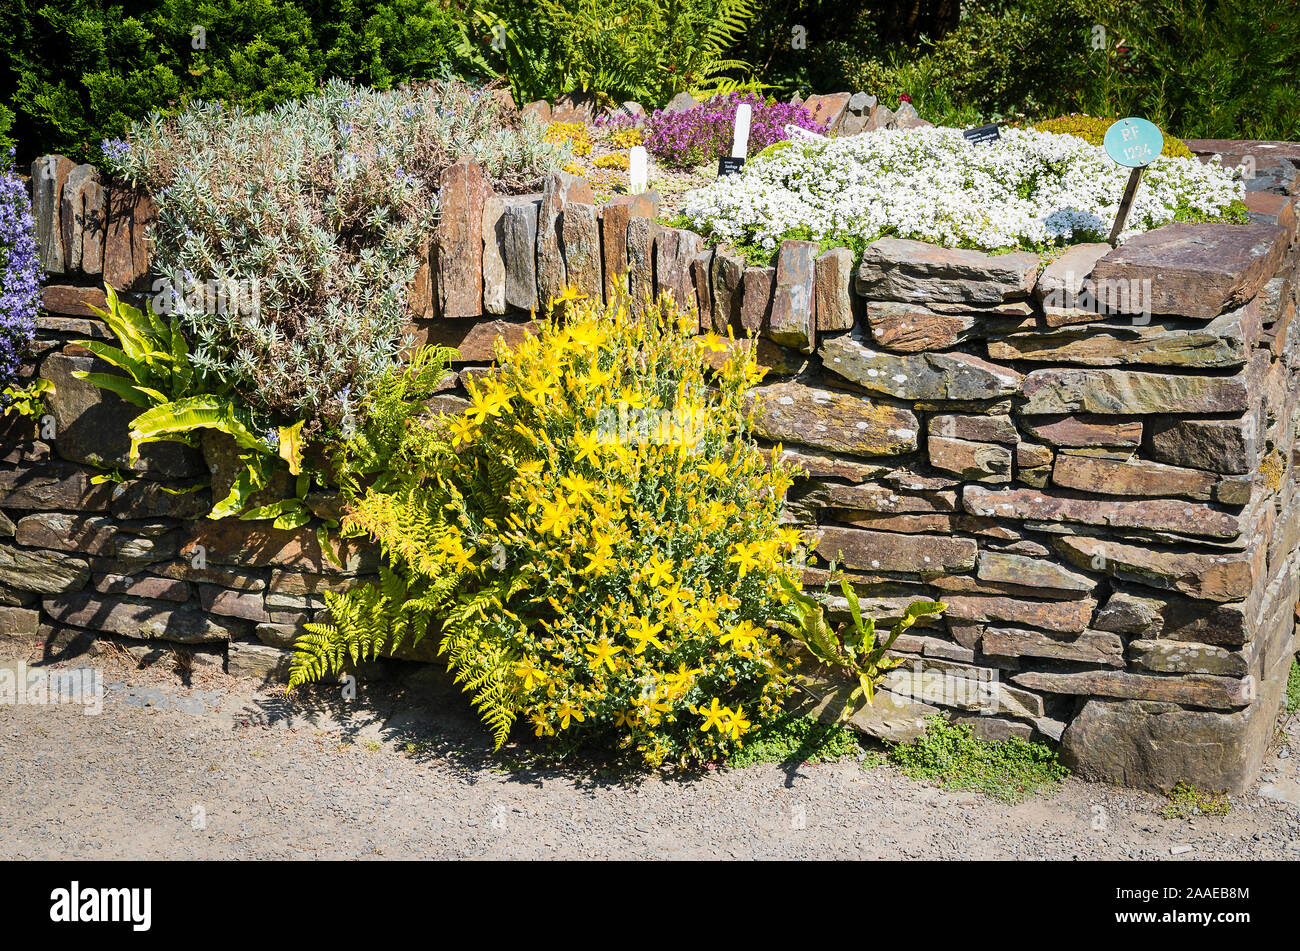 A dwarf form of Hypericum olympicum growing from the crevices of a dry stone wall with top planting of alpine plants in Rosemoor gardens, Devon, UK Stock Photo